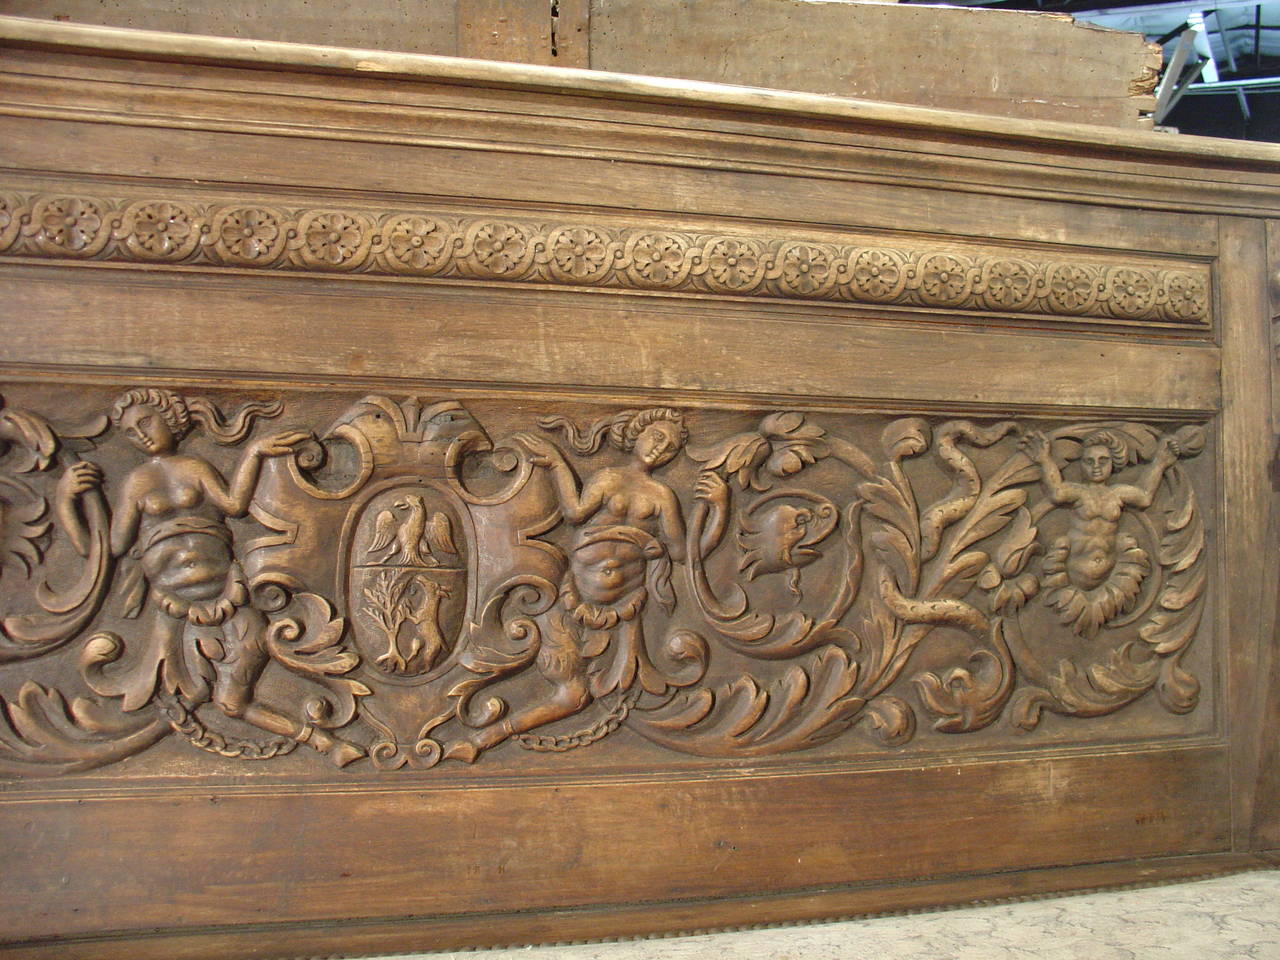 Cleaned French Oak

This comfortable antique French Renaissance style bench with a trunk in the seat has beautiful motifs typical of the Renaissance style.  On the bench’s back, there is scrolling foliage with demi figures, dolphins, and serpents,